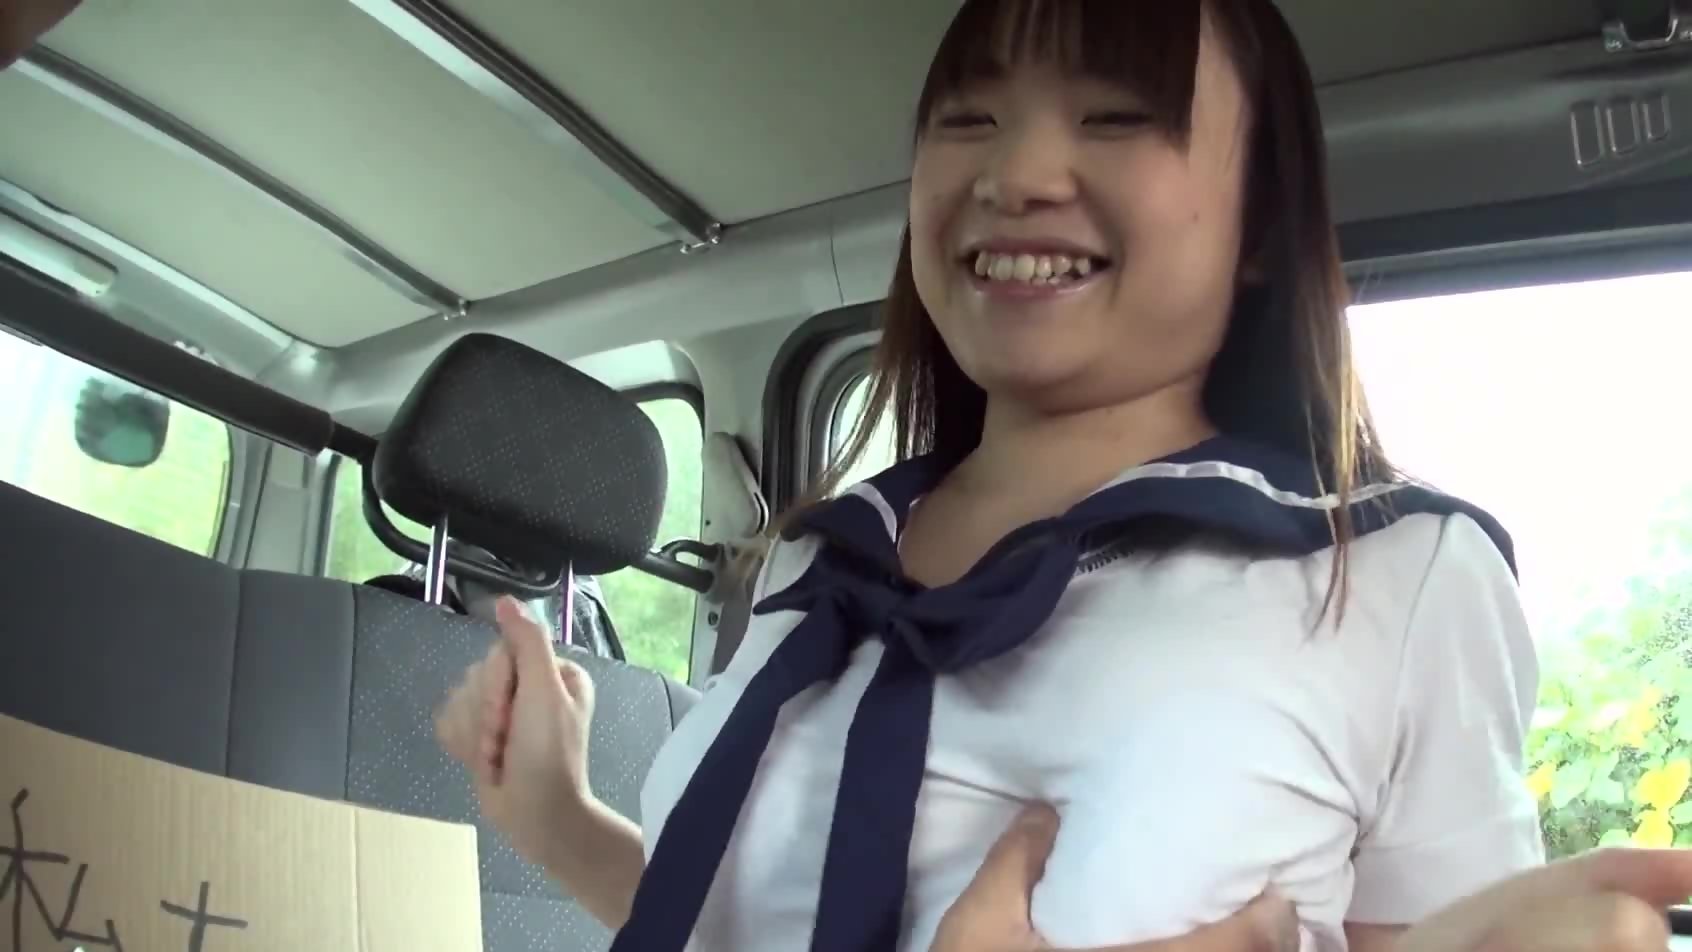 Japanese college girl with big tits gives blowjob in the image